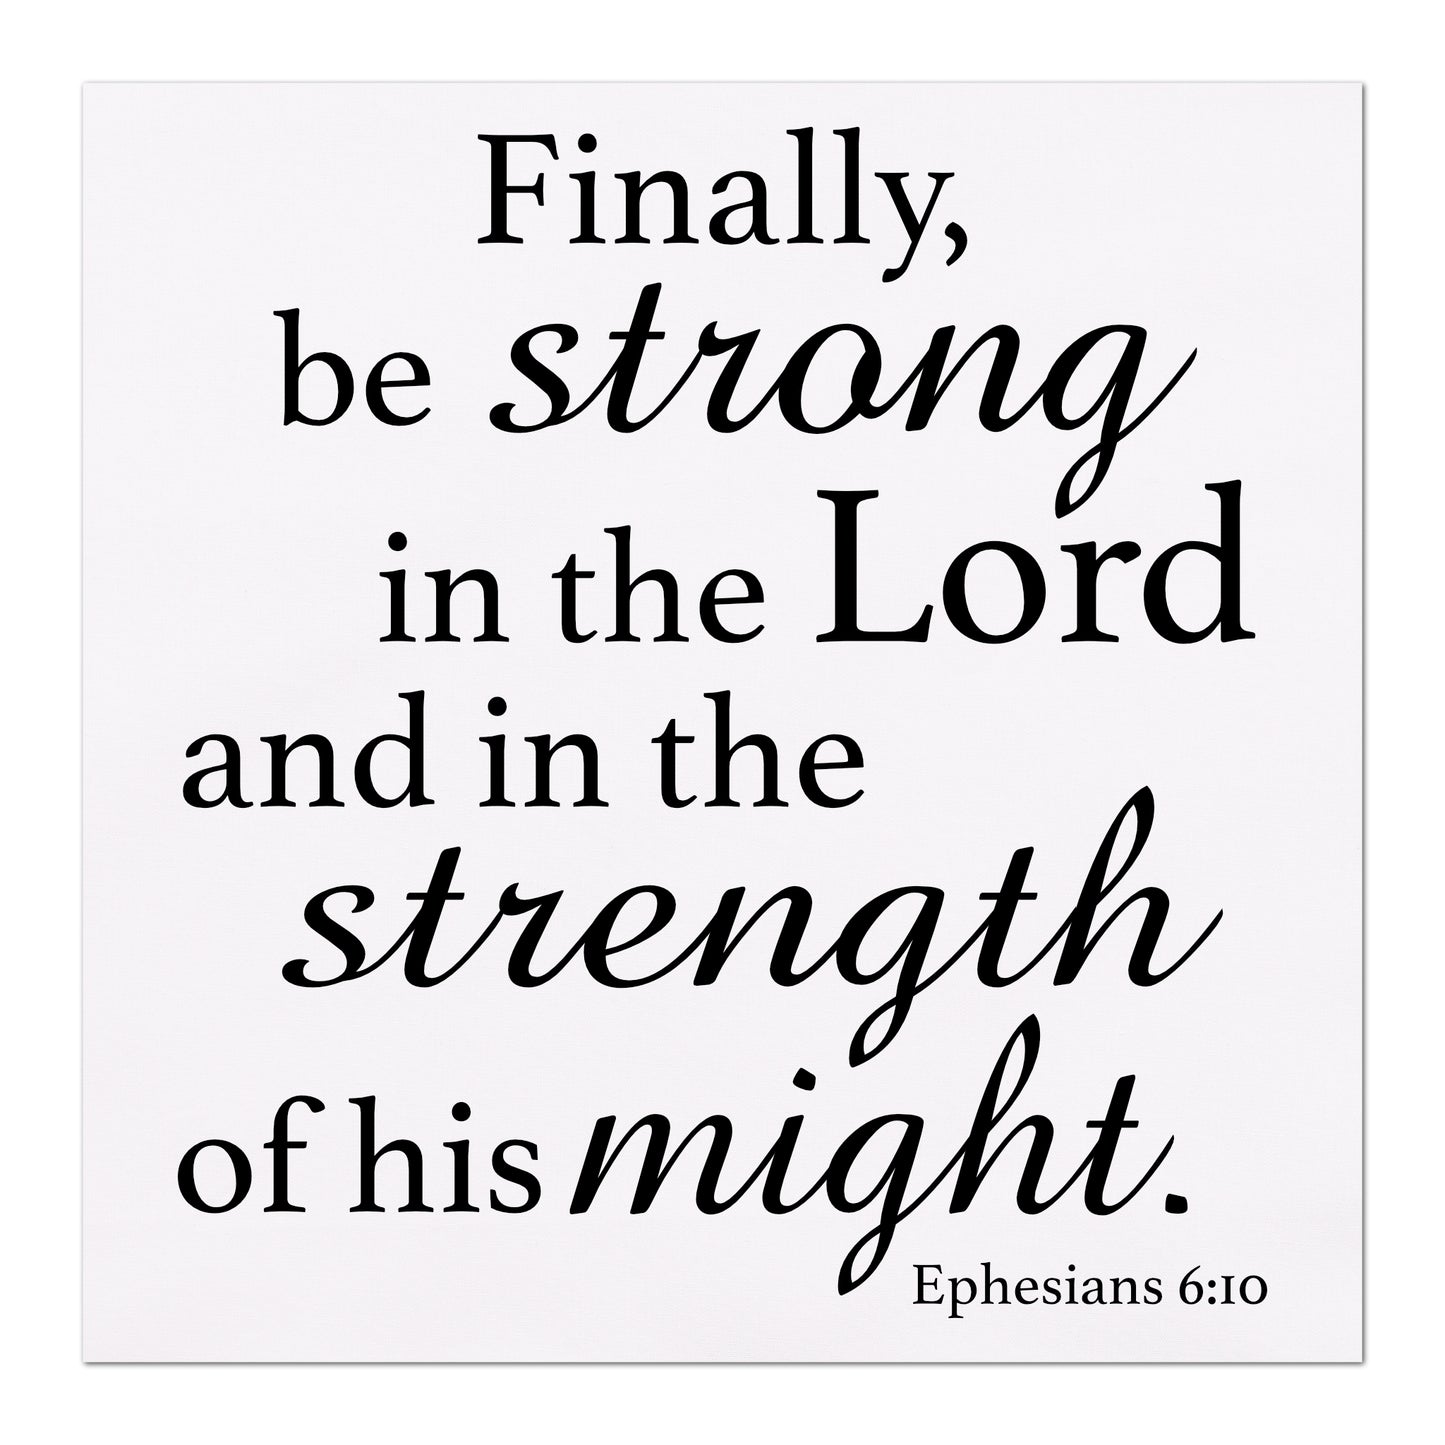 Finally be strong in the Lord and in the strength of his might - Ephesians 6:10 - Fabric Panel Print